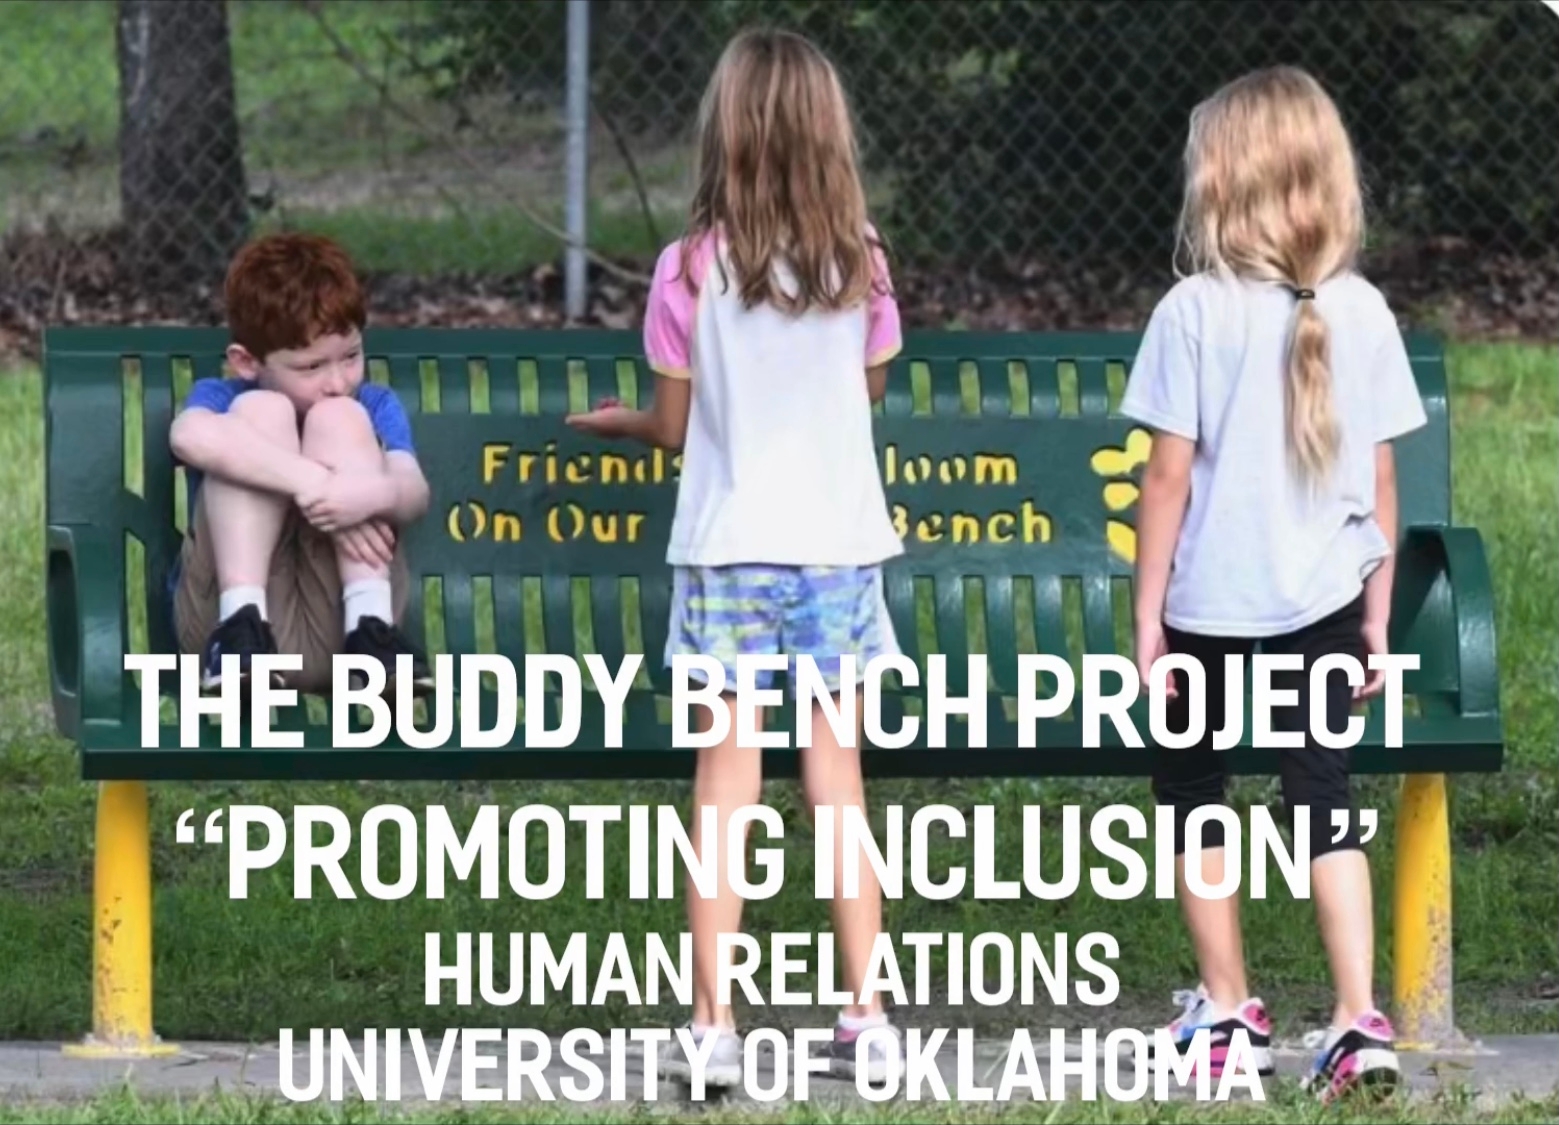 The Buddy Bench Project, "Promoting Inclusion", Human Relations, University of Oklahoma. Three children sit and stand by a bench.